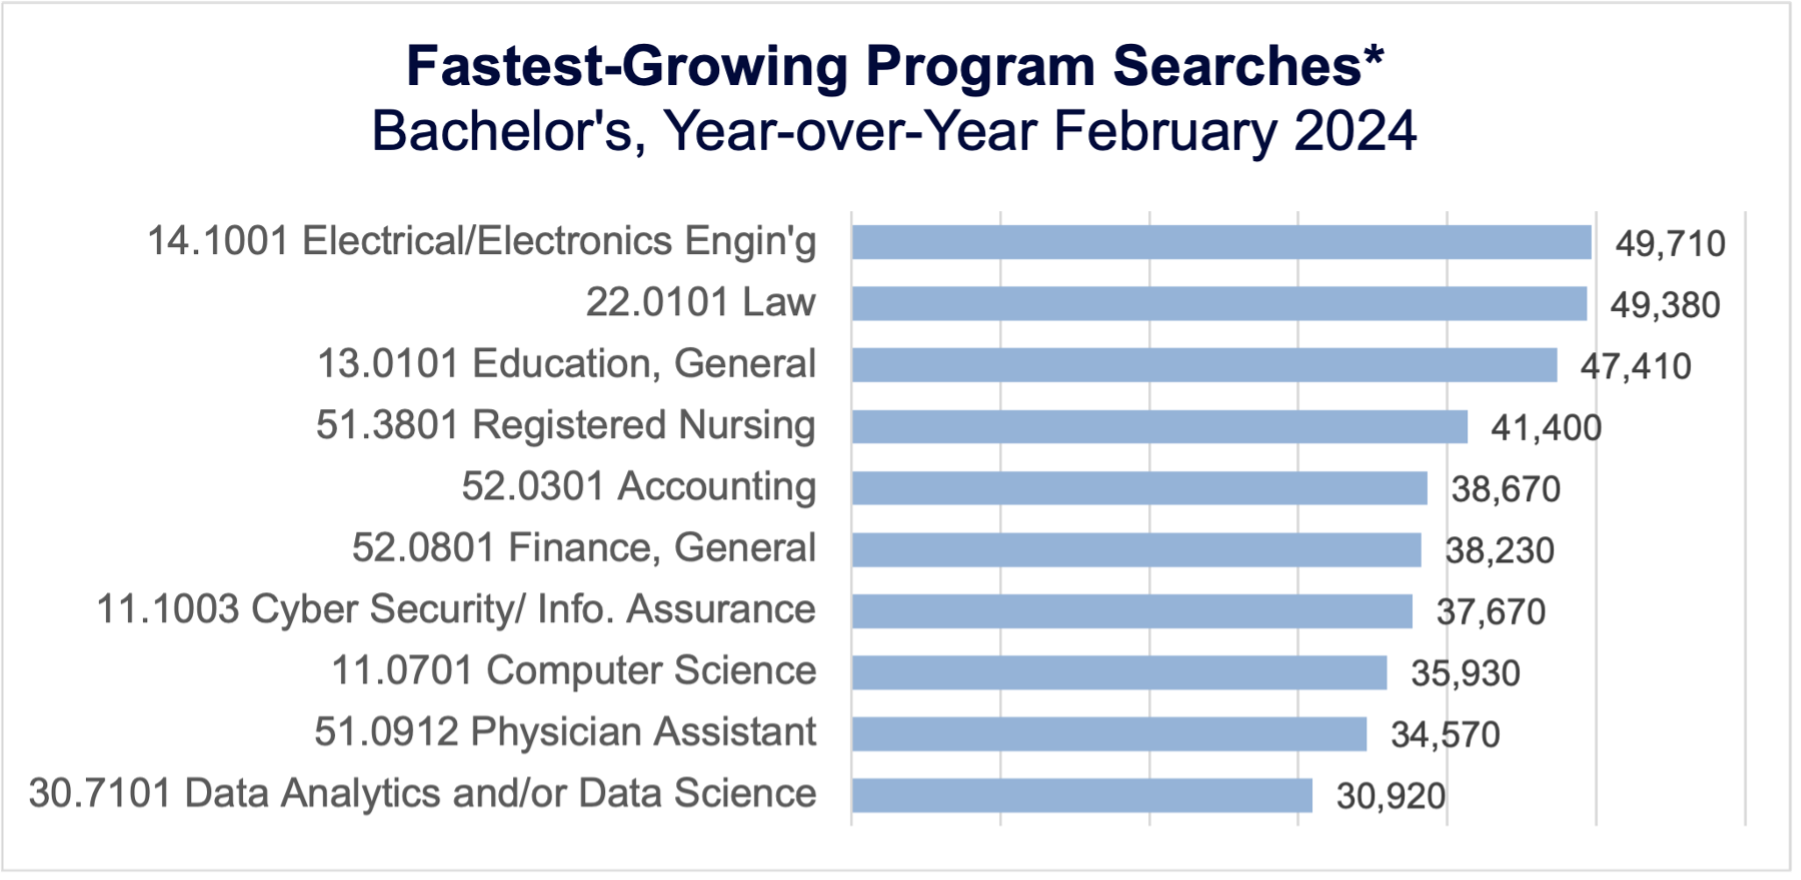 Fastest-Growing Program Searches*: Bachelor's, YoY February 2024